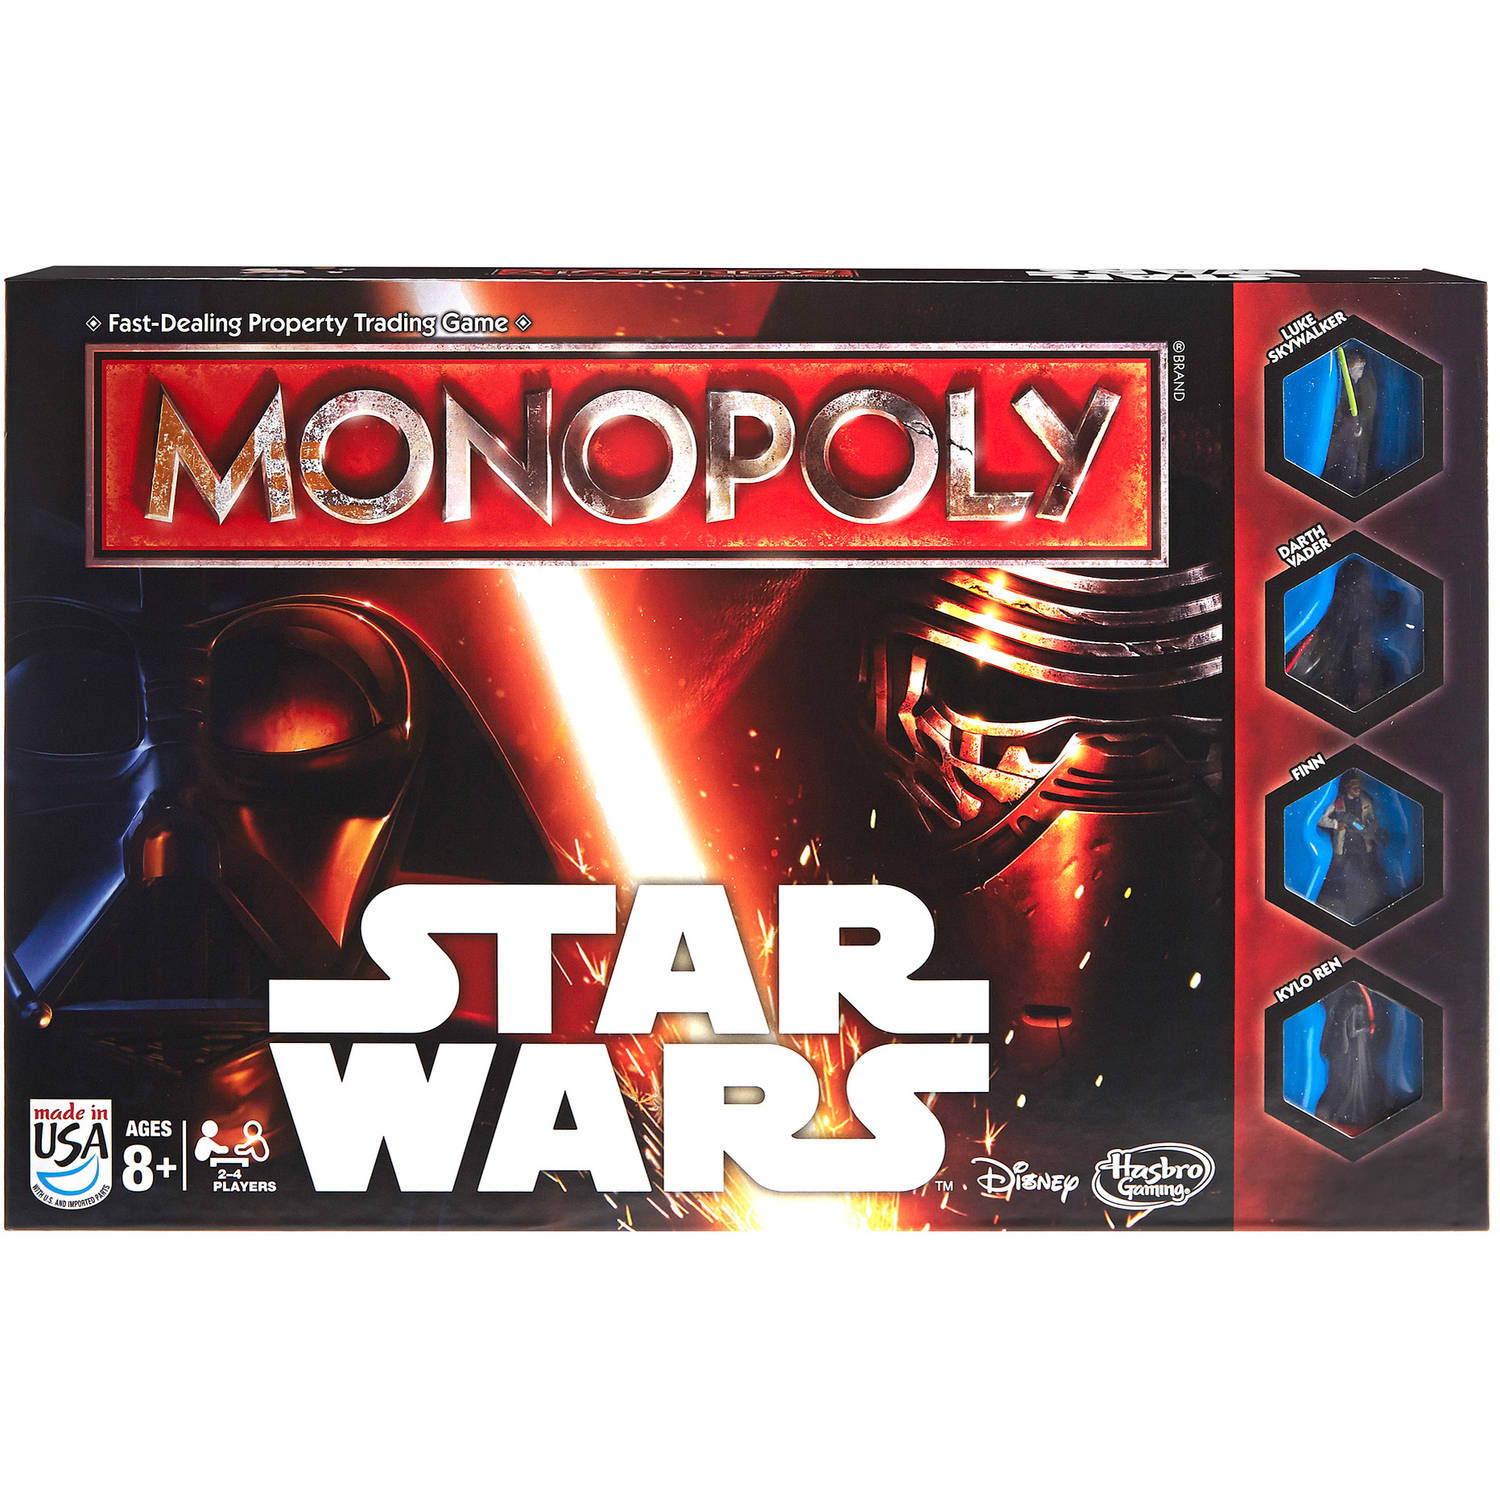 Monopoly Game Star Wars - image 1 of 17